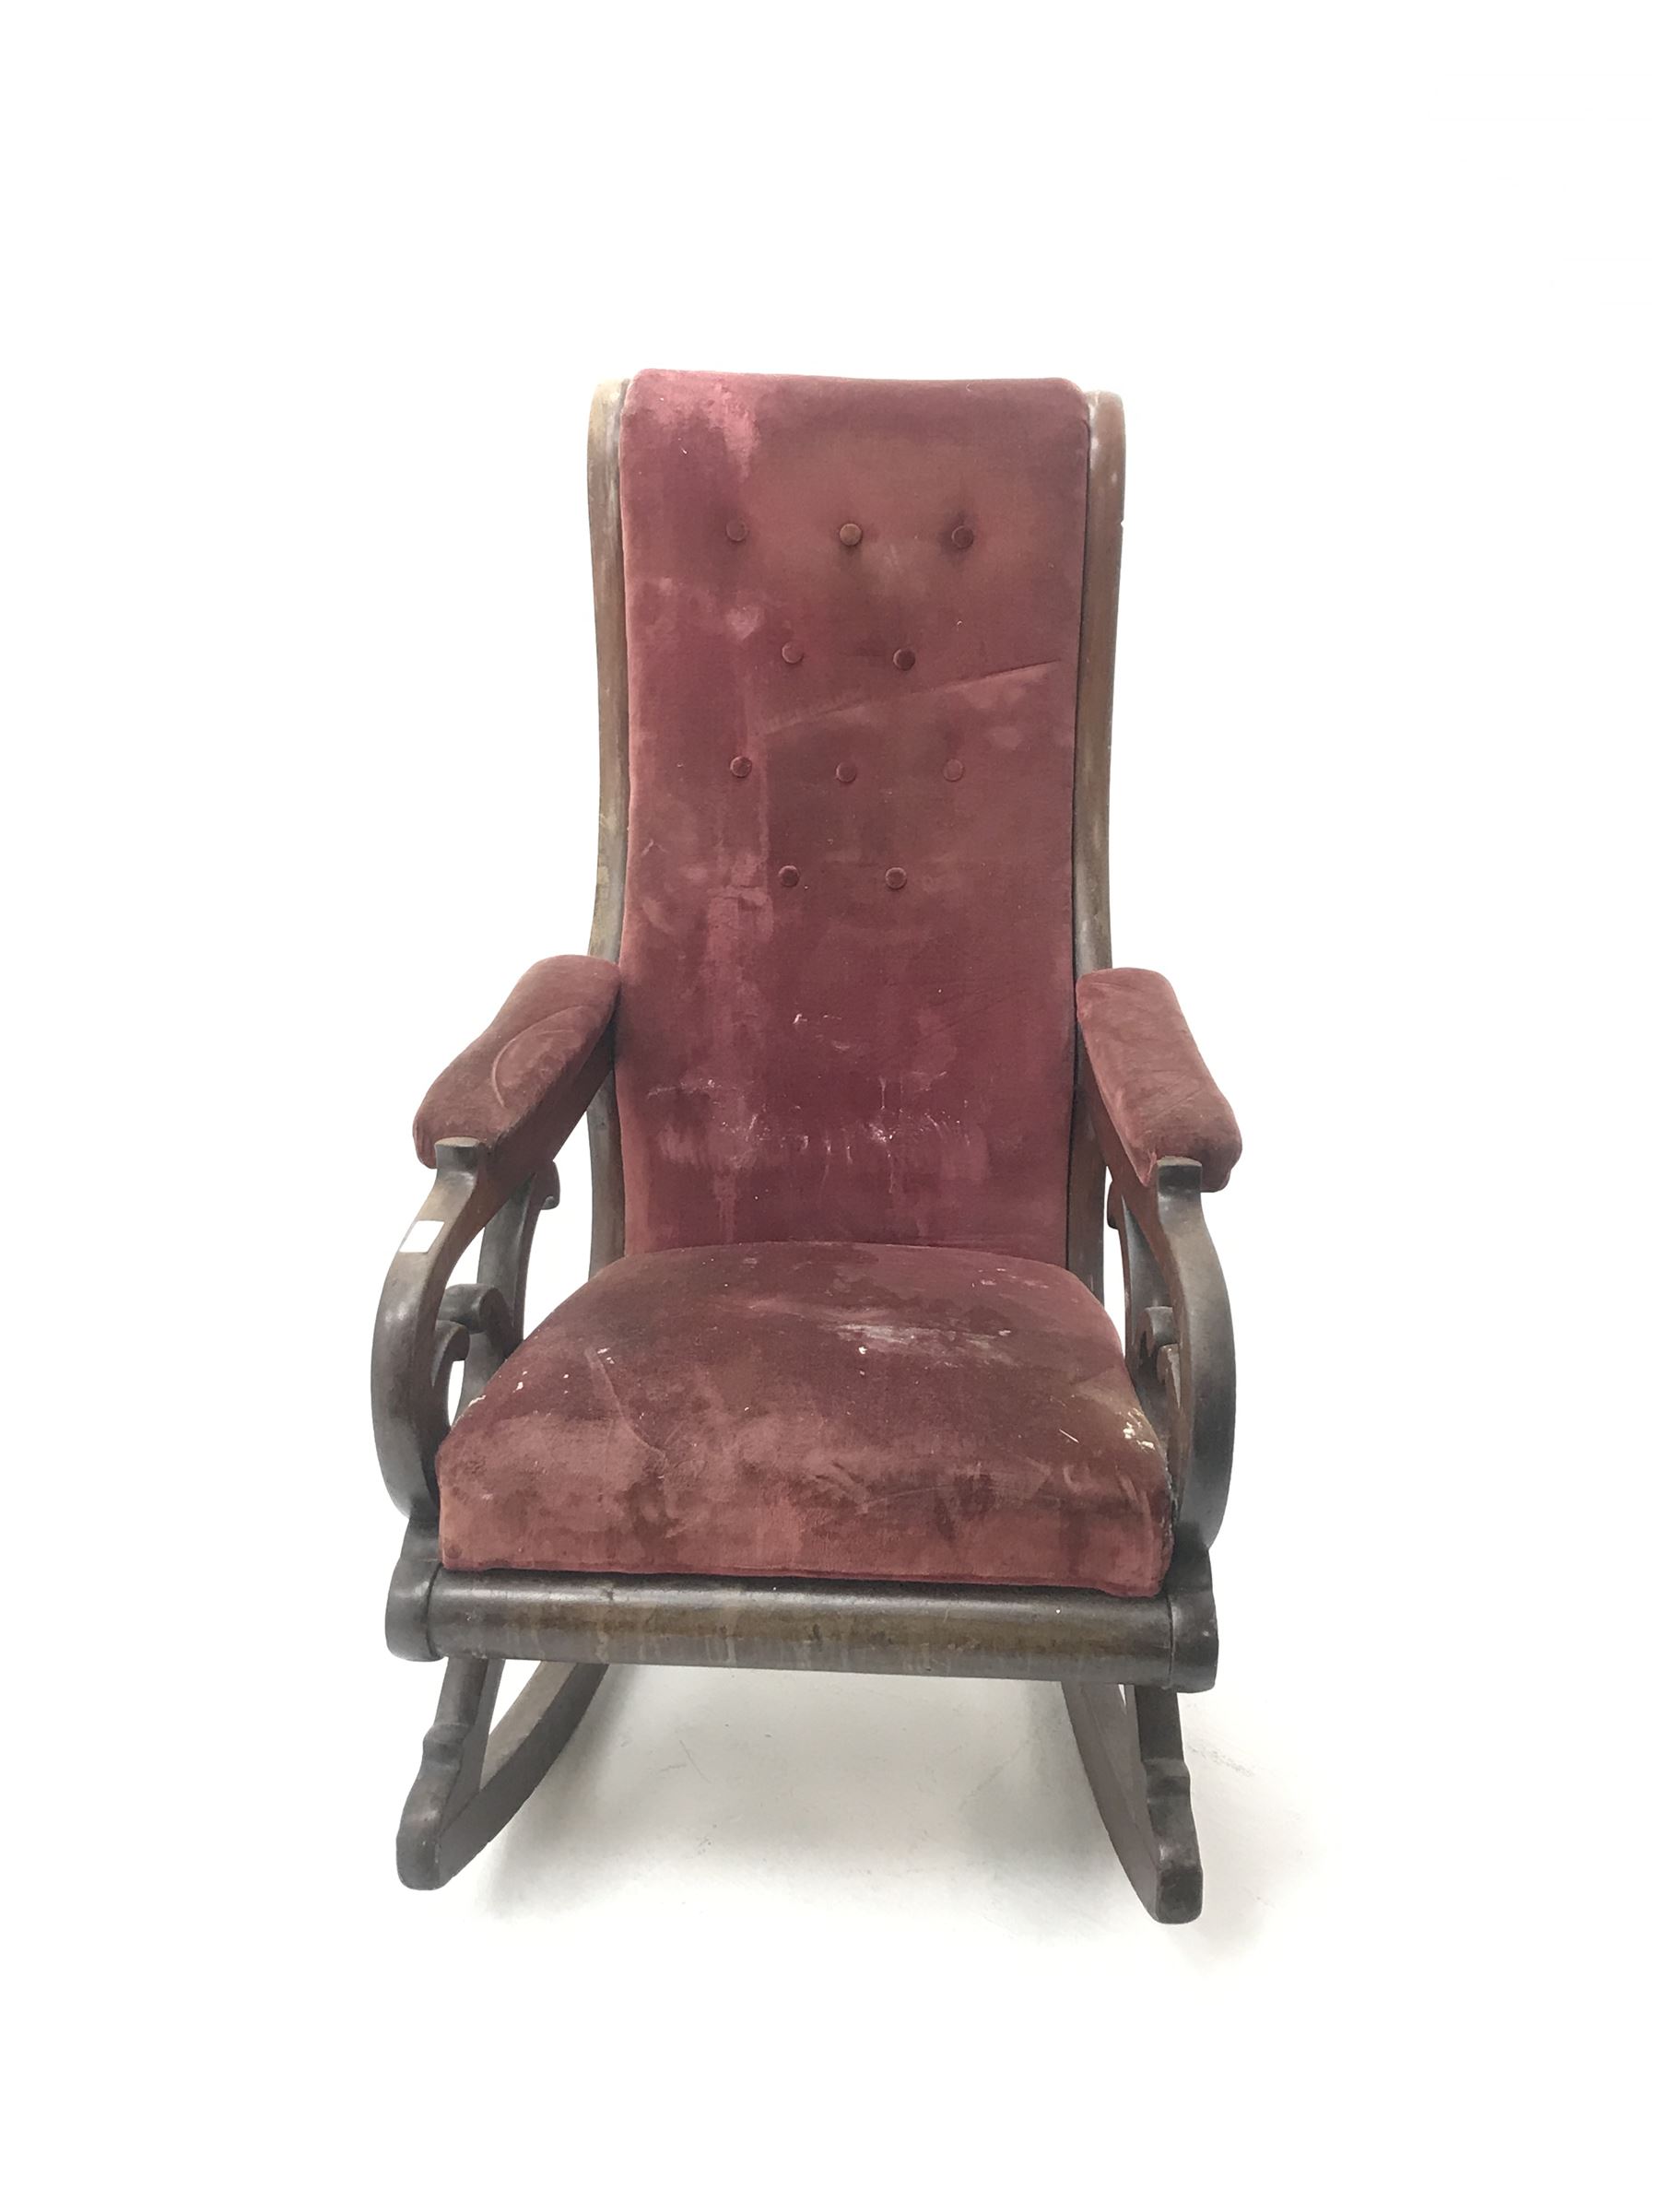 Victorian library style mahogany framed rocking chair - Image 2 of 2